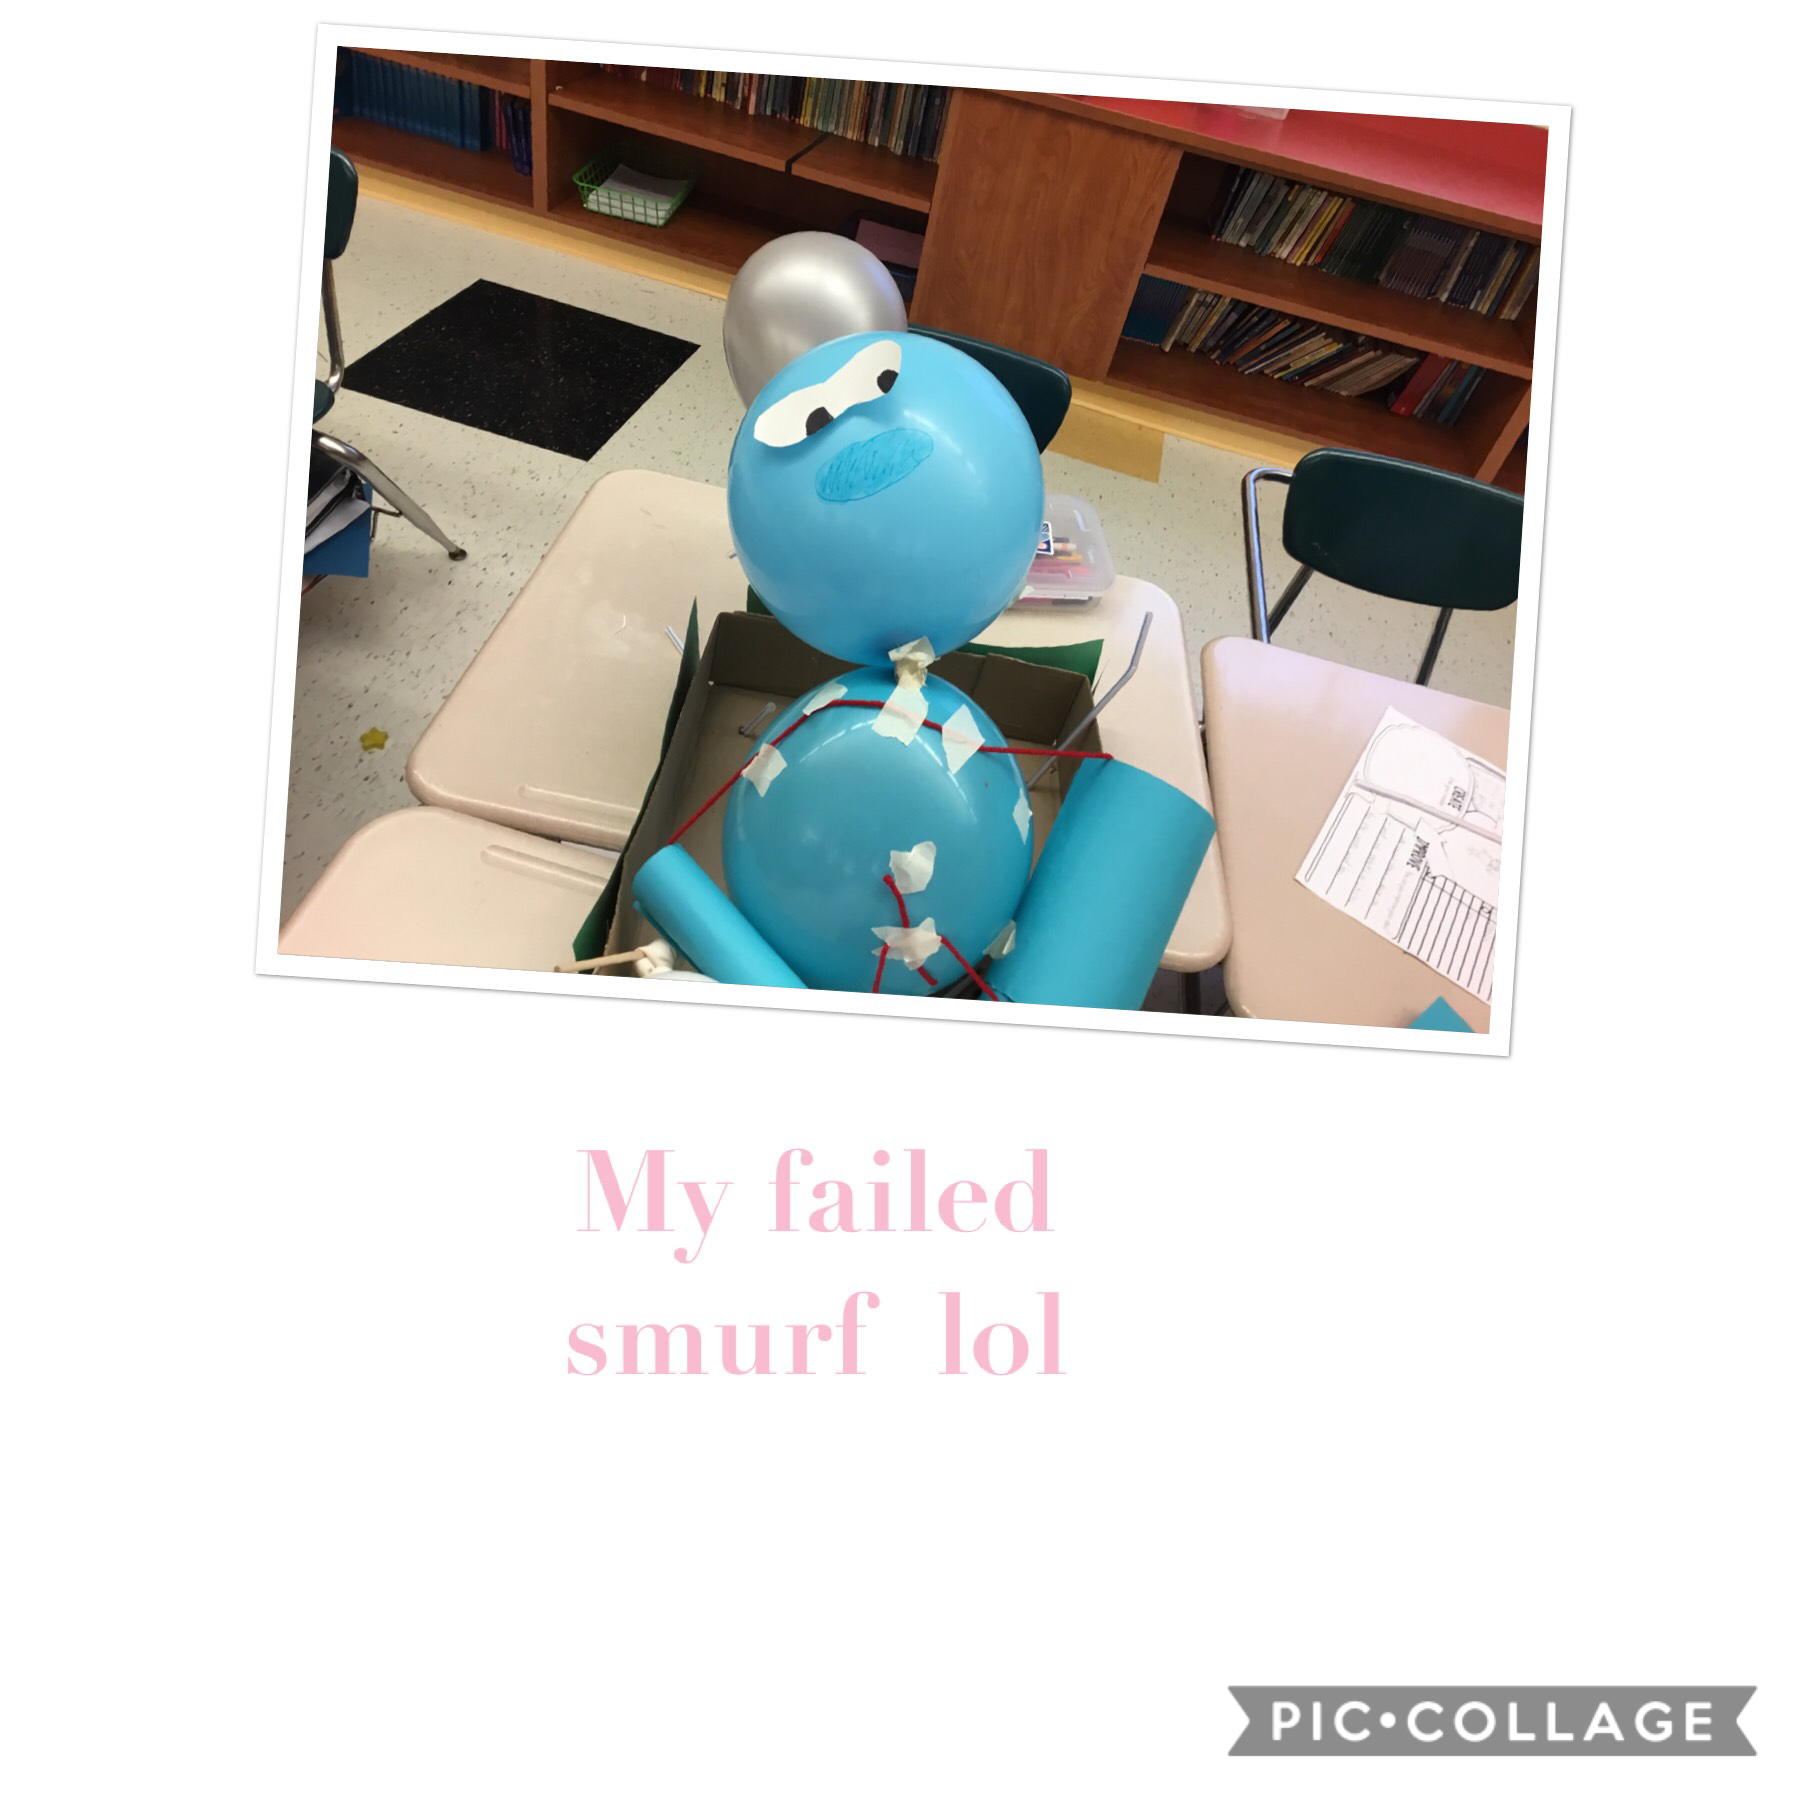 Hey anyways sorry I did not post anything for thanksgiving. Hehe that was my fault. But I hoped you enjoyed your thanksgiving. This is a picture of my smurf ballon 
Characters. We failed the smurf very badly. Yess, I really don’t know about this. I made t